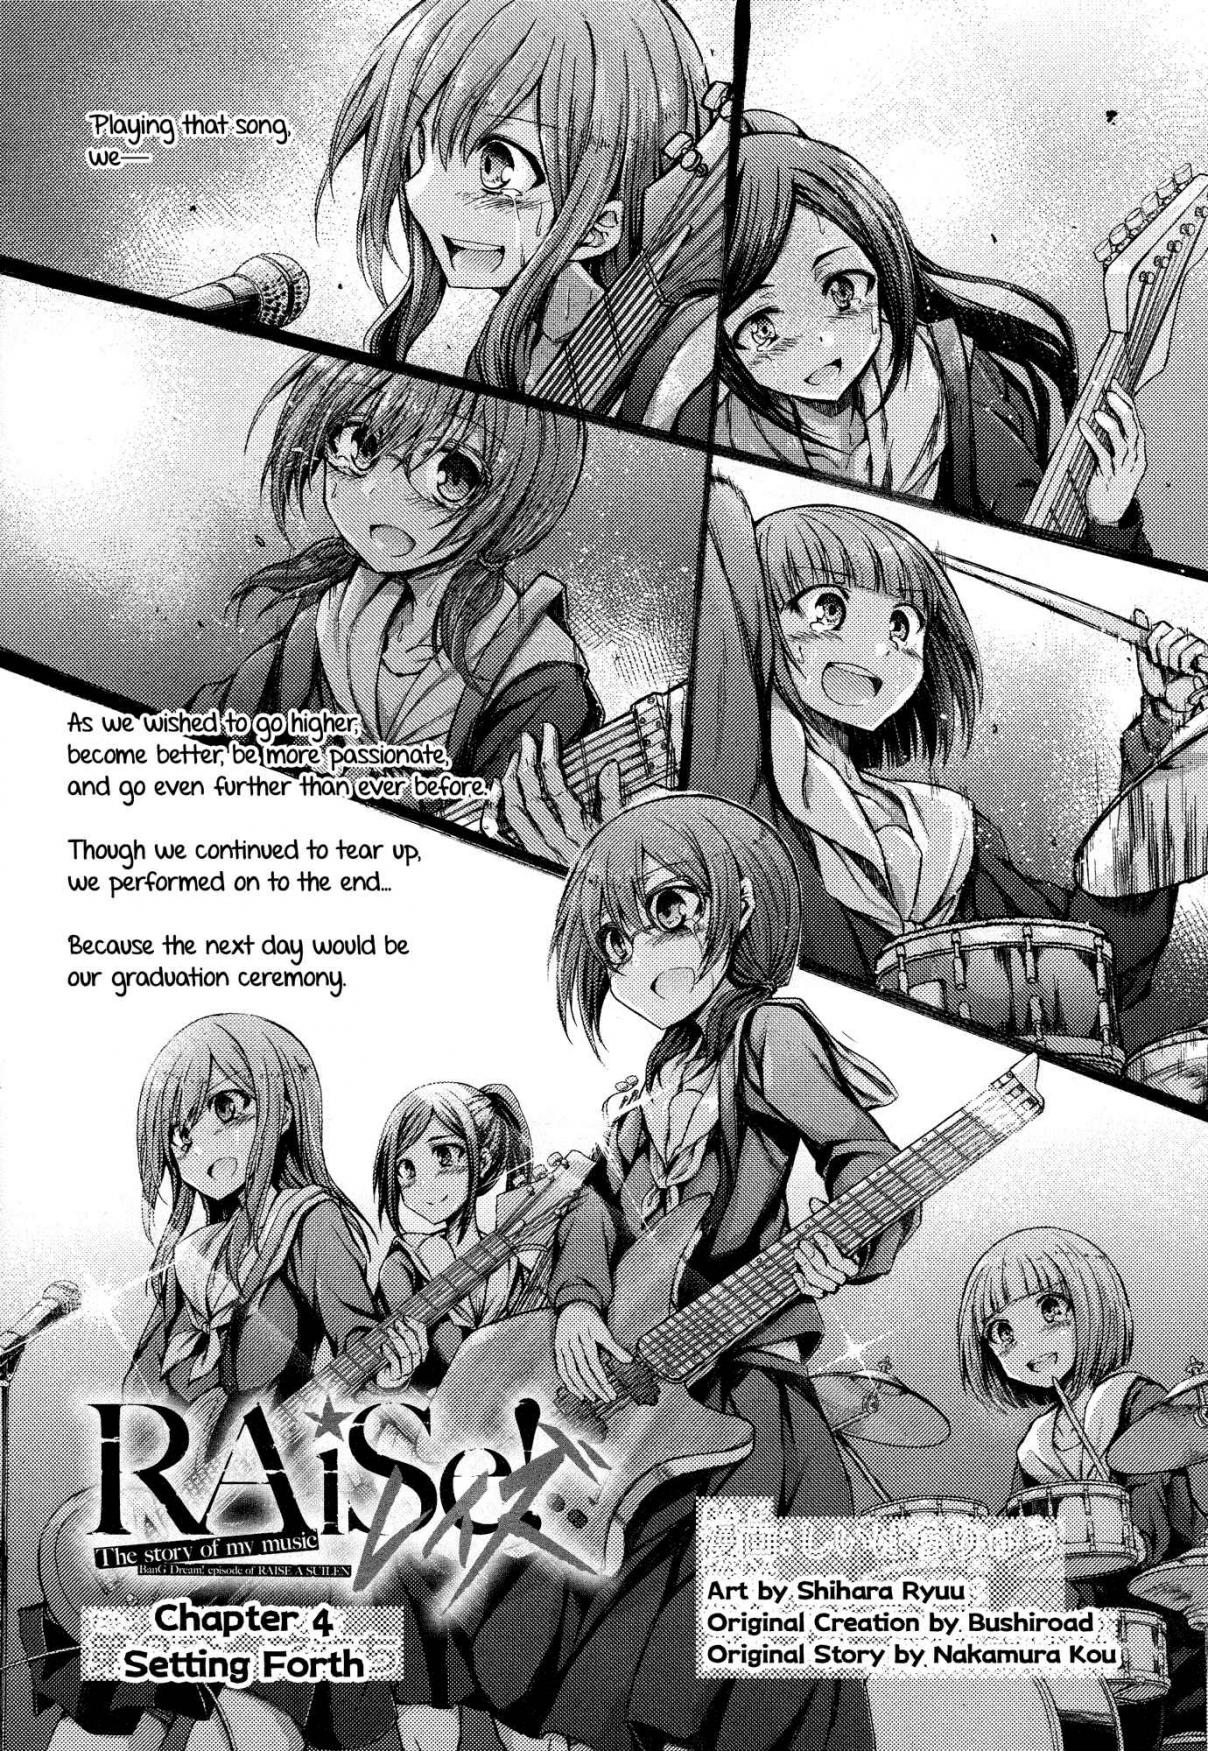 BanG Dream! RAiSe! The story of my music Ch. 4 Setting Forth